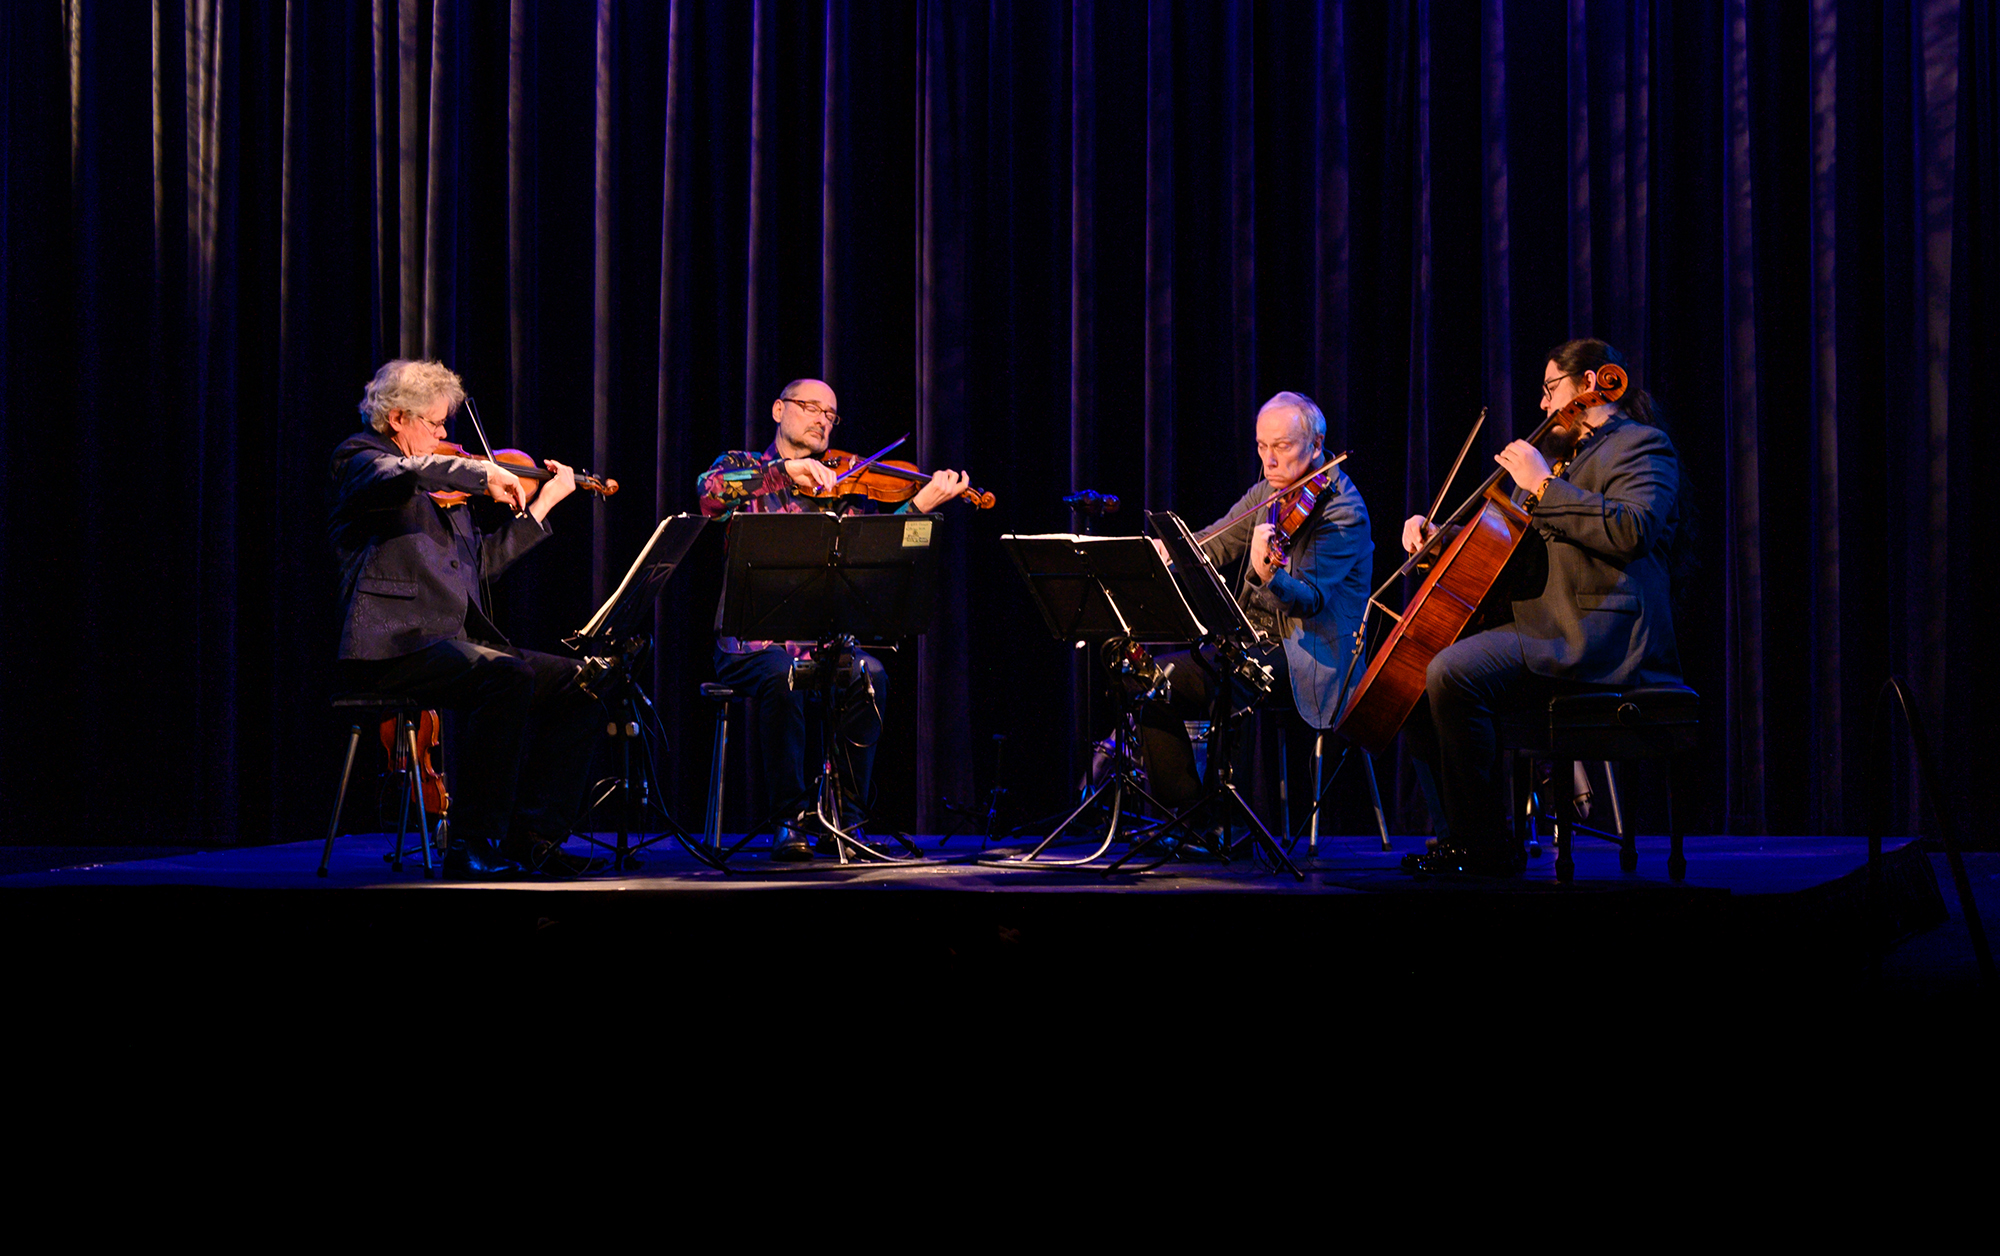 New Frontiers: A look back at the Kronos Quartet